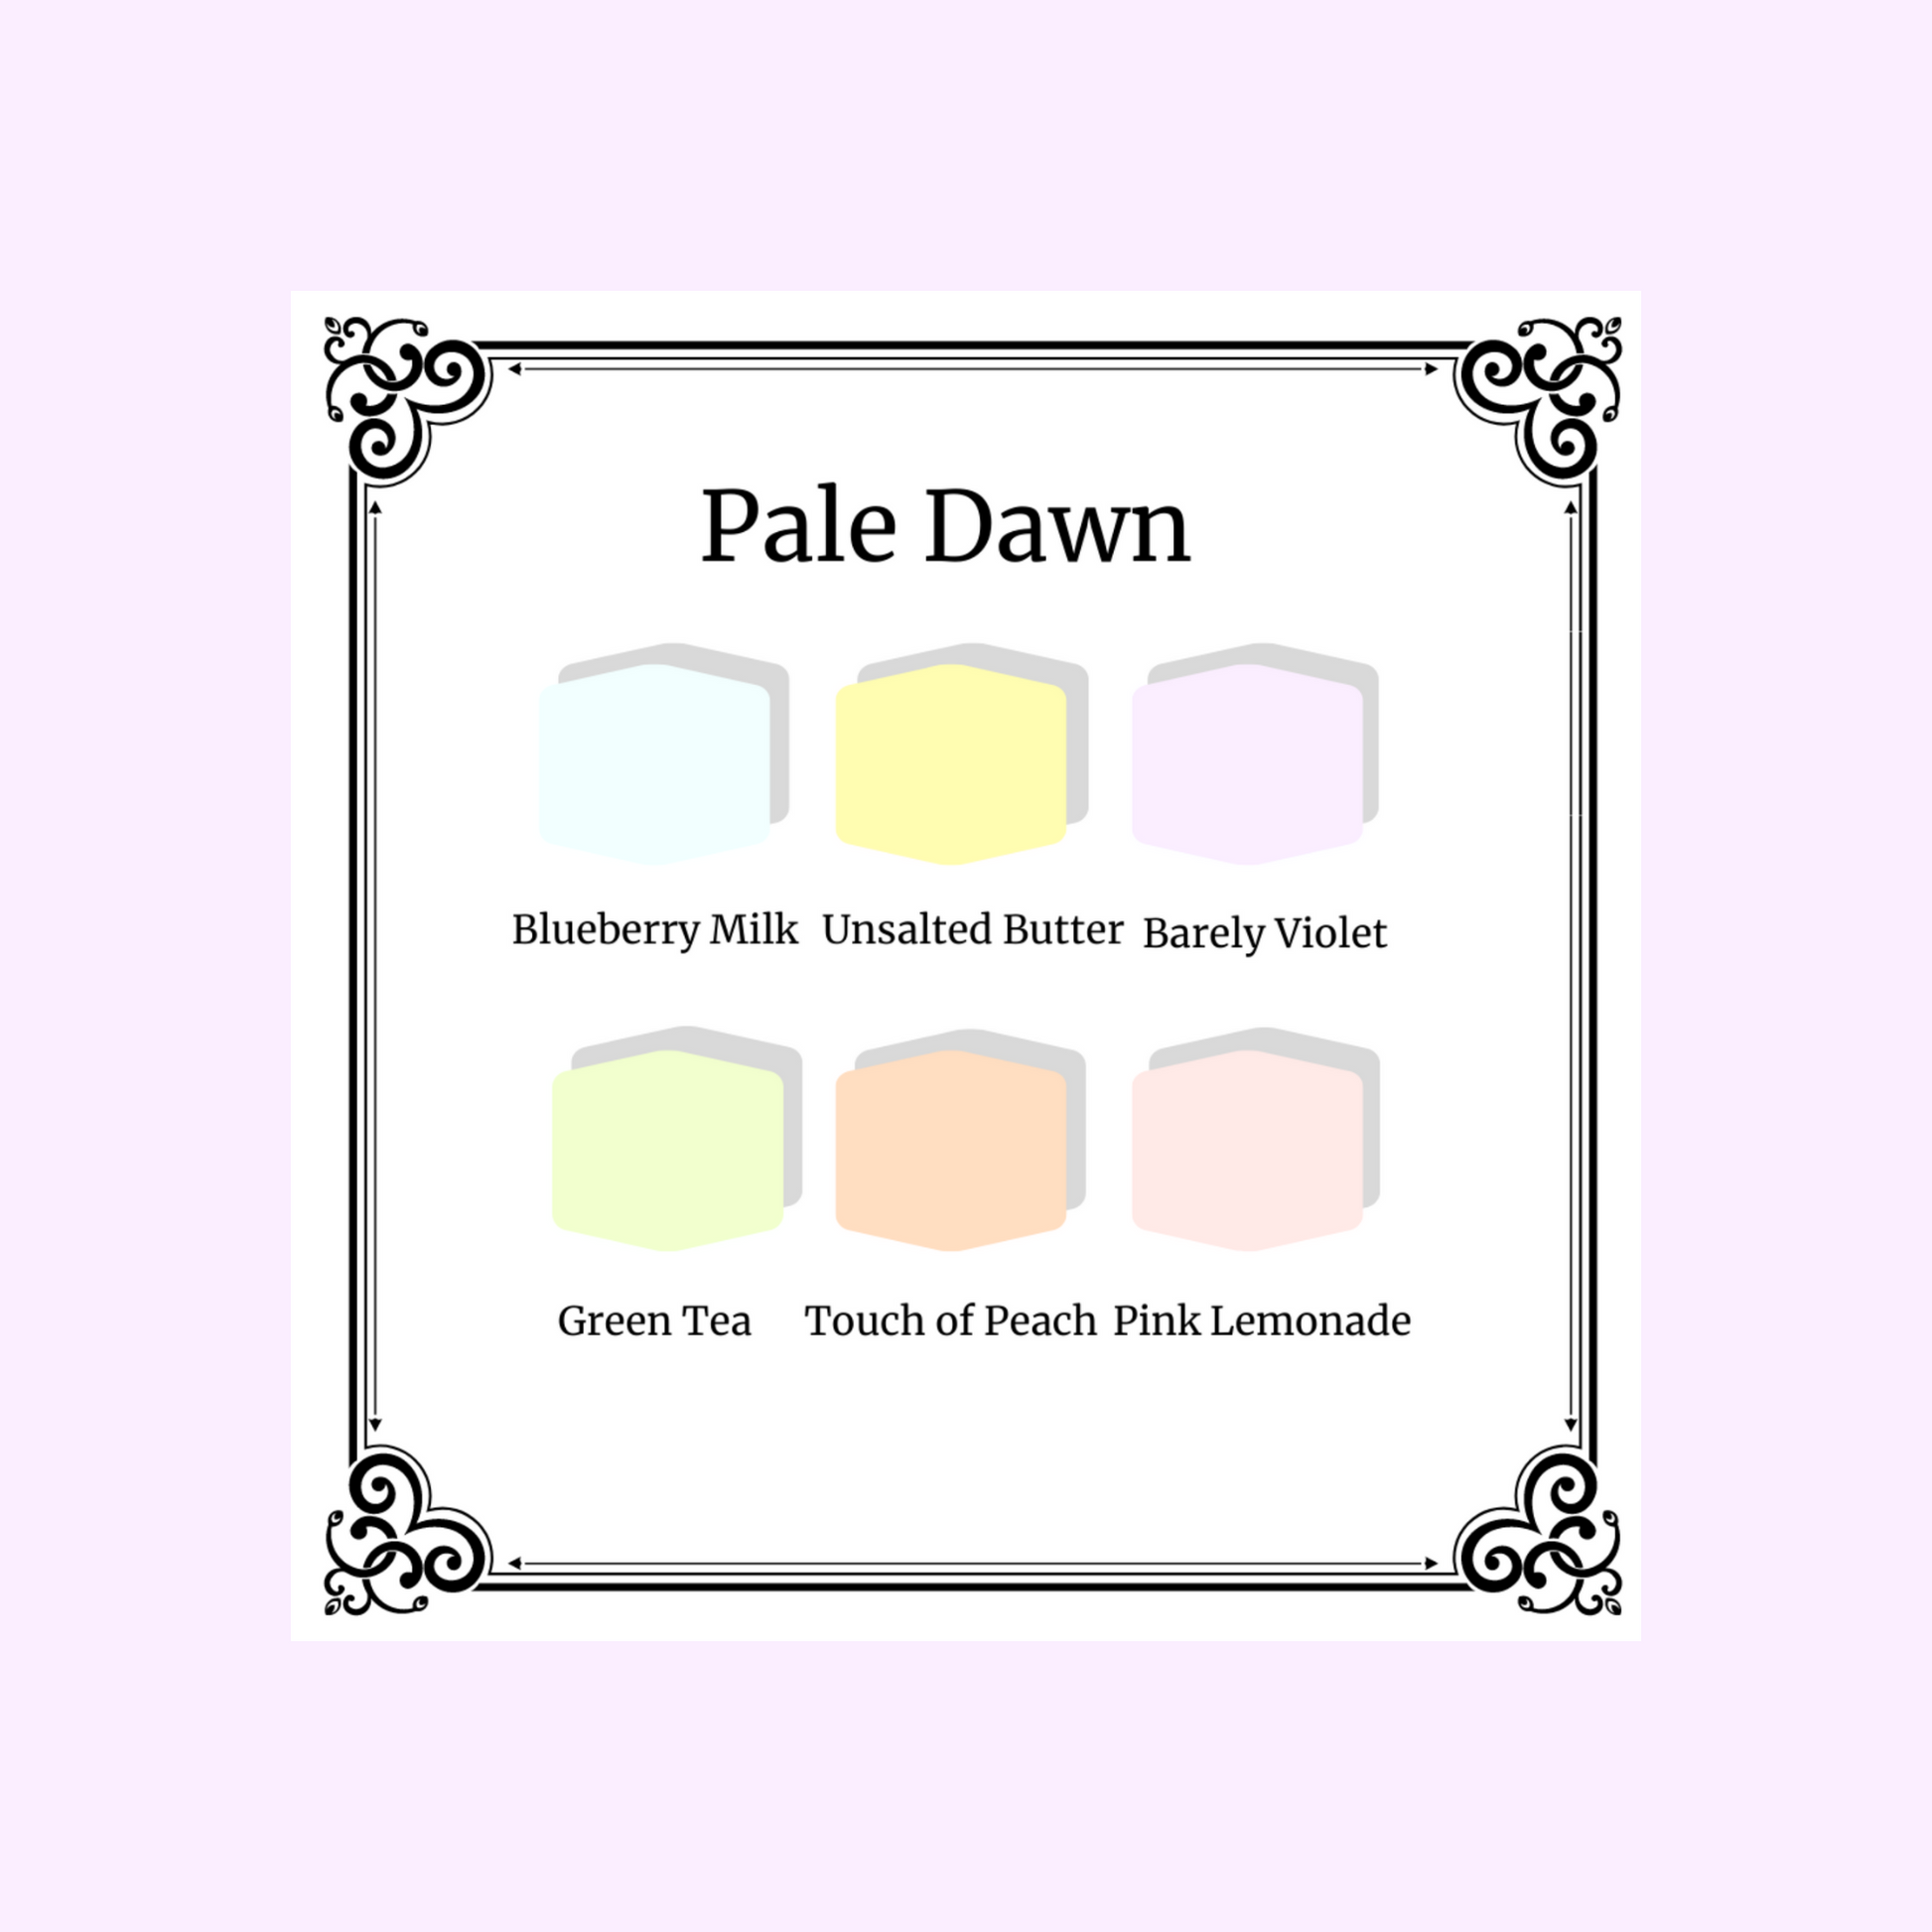 Polymer Clay Pale Dawn Color palette showing the lovely pastel colors:  Blueberry Milk, Unsalted Butter, Barely Violet, Green Tea, Touch of Peach and Pink Lemonade